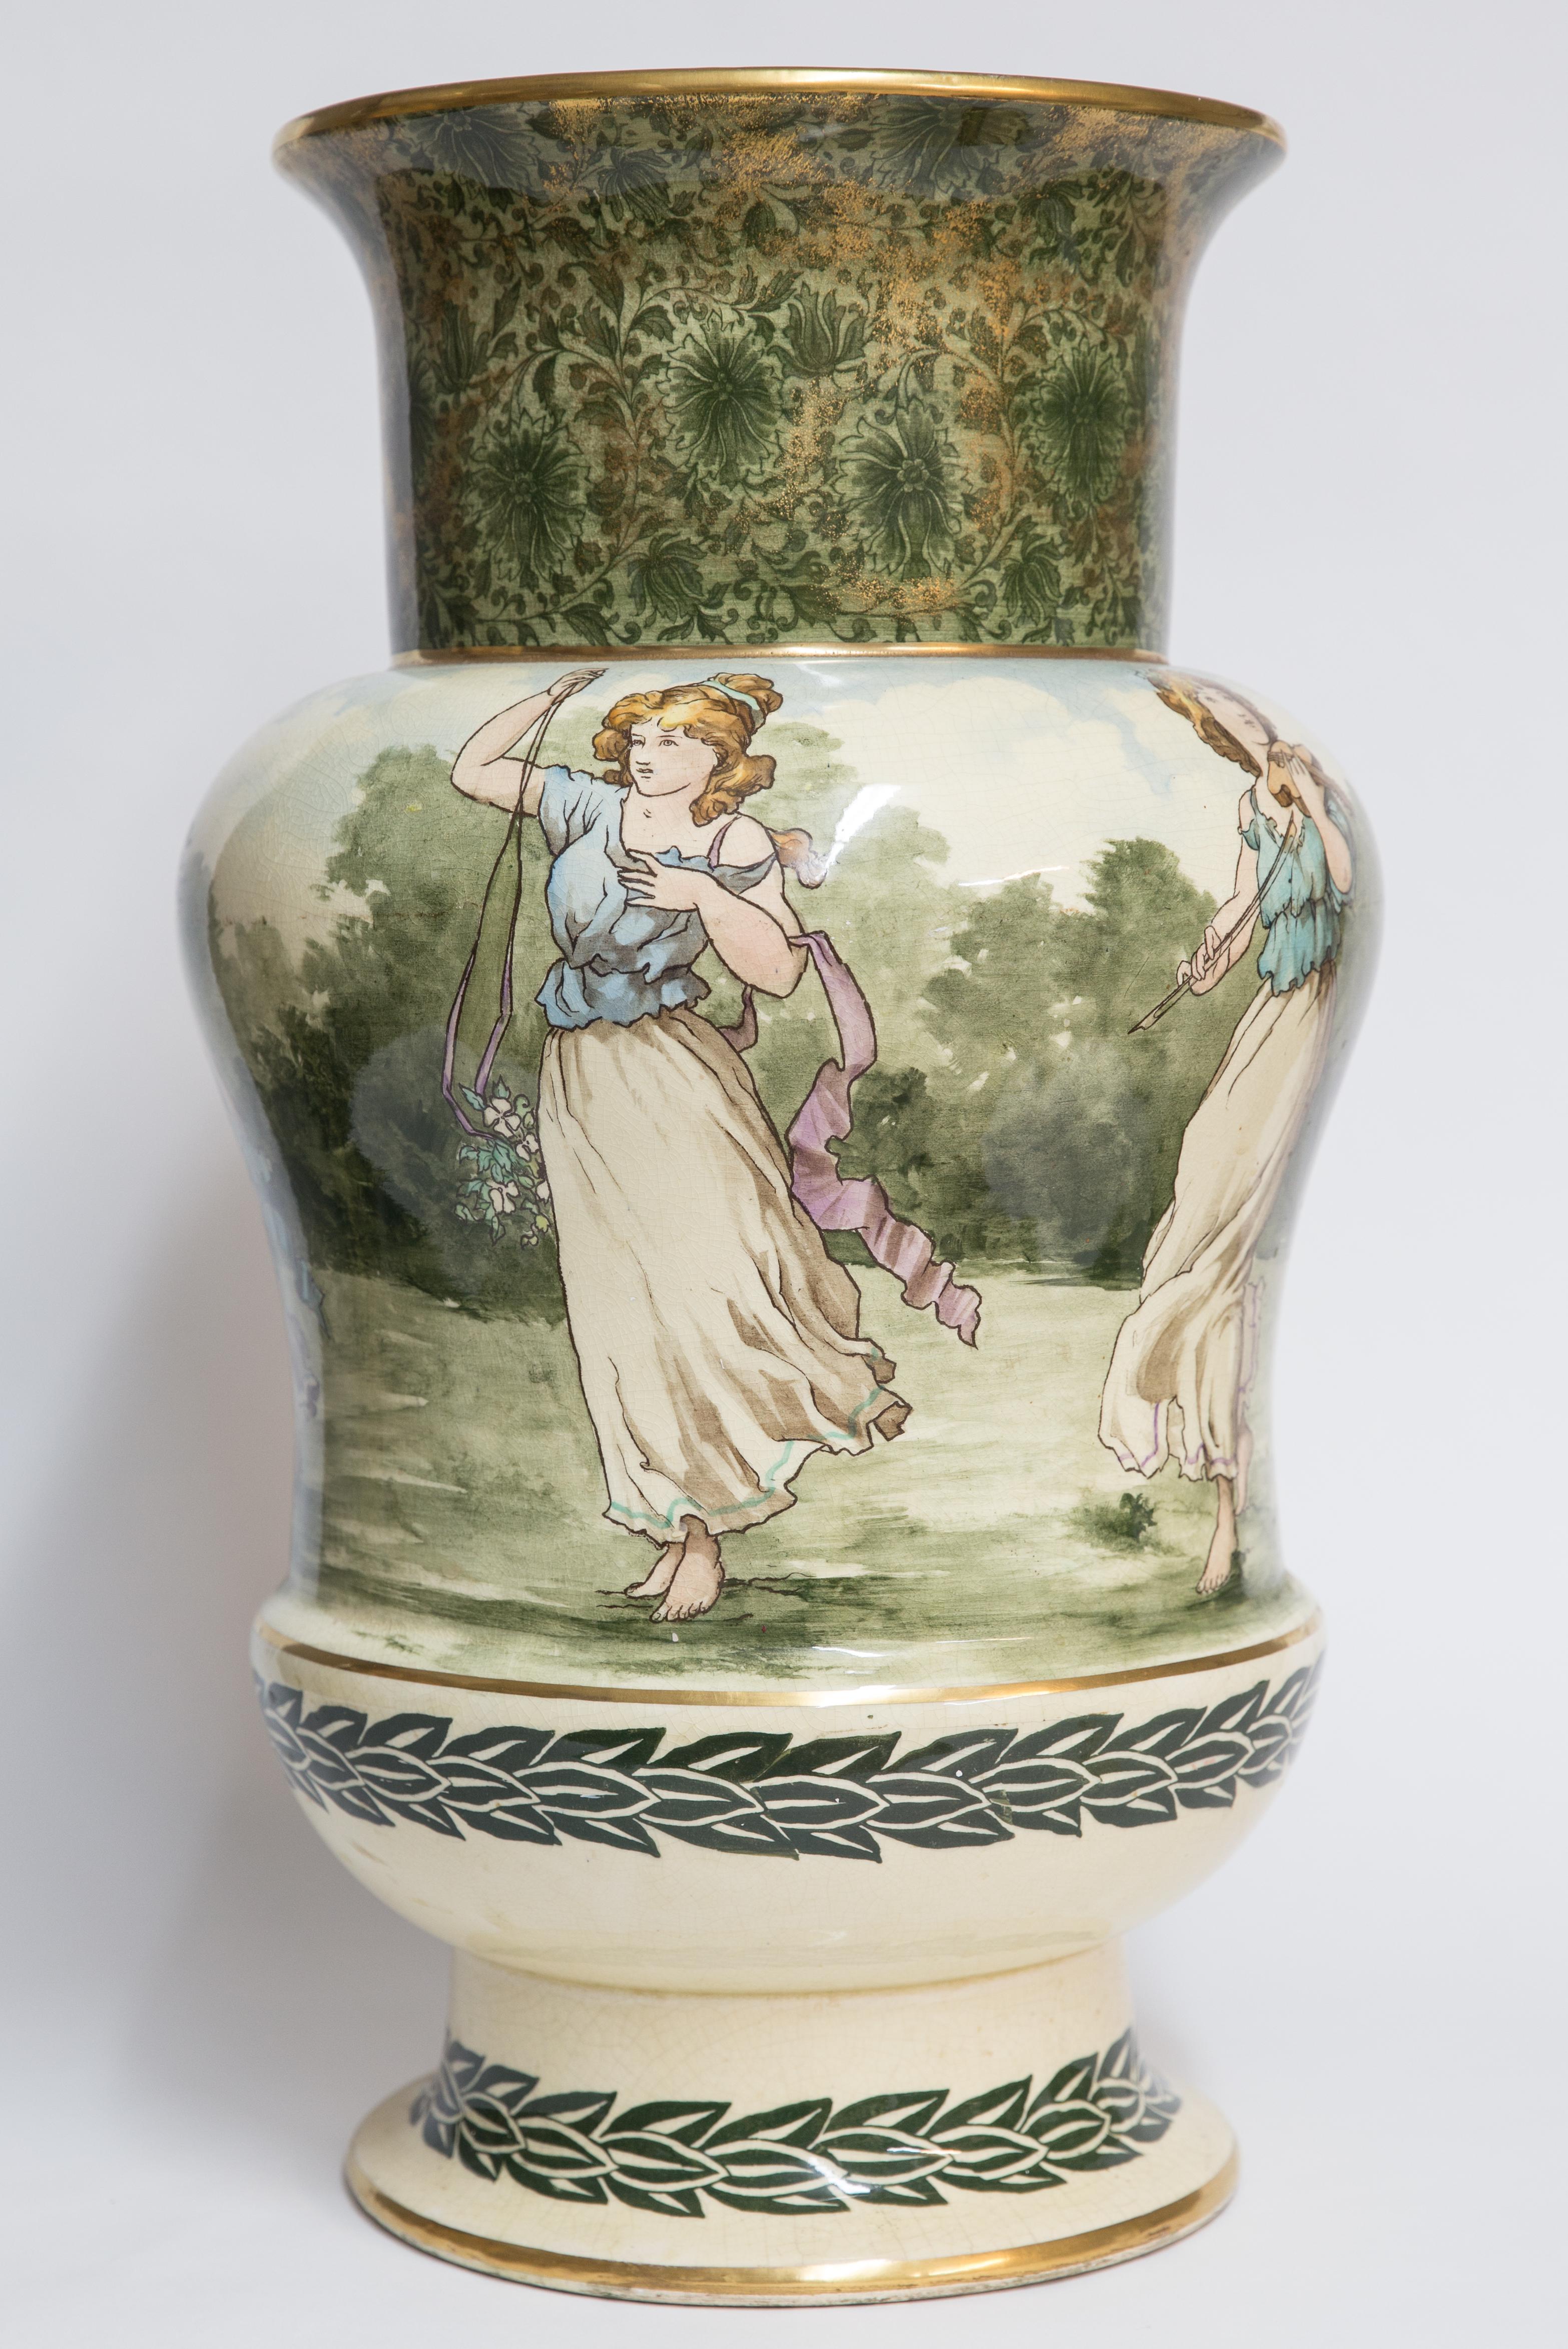 Offered is an exceptional antique turn of the century exhibition size Royal Doulton hand painted vase depicting dancing, frolicking young women. Royal Doulton is an English ceramic manufacturing company producing tableware and collectables, dating